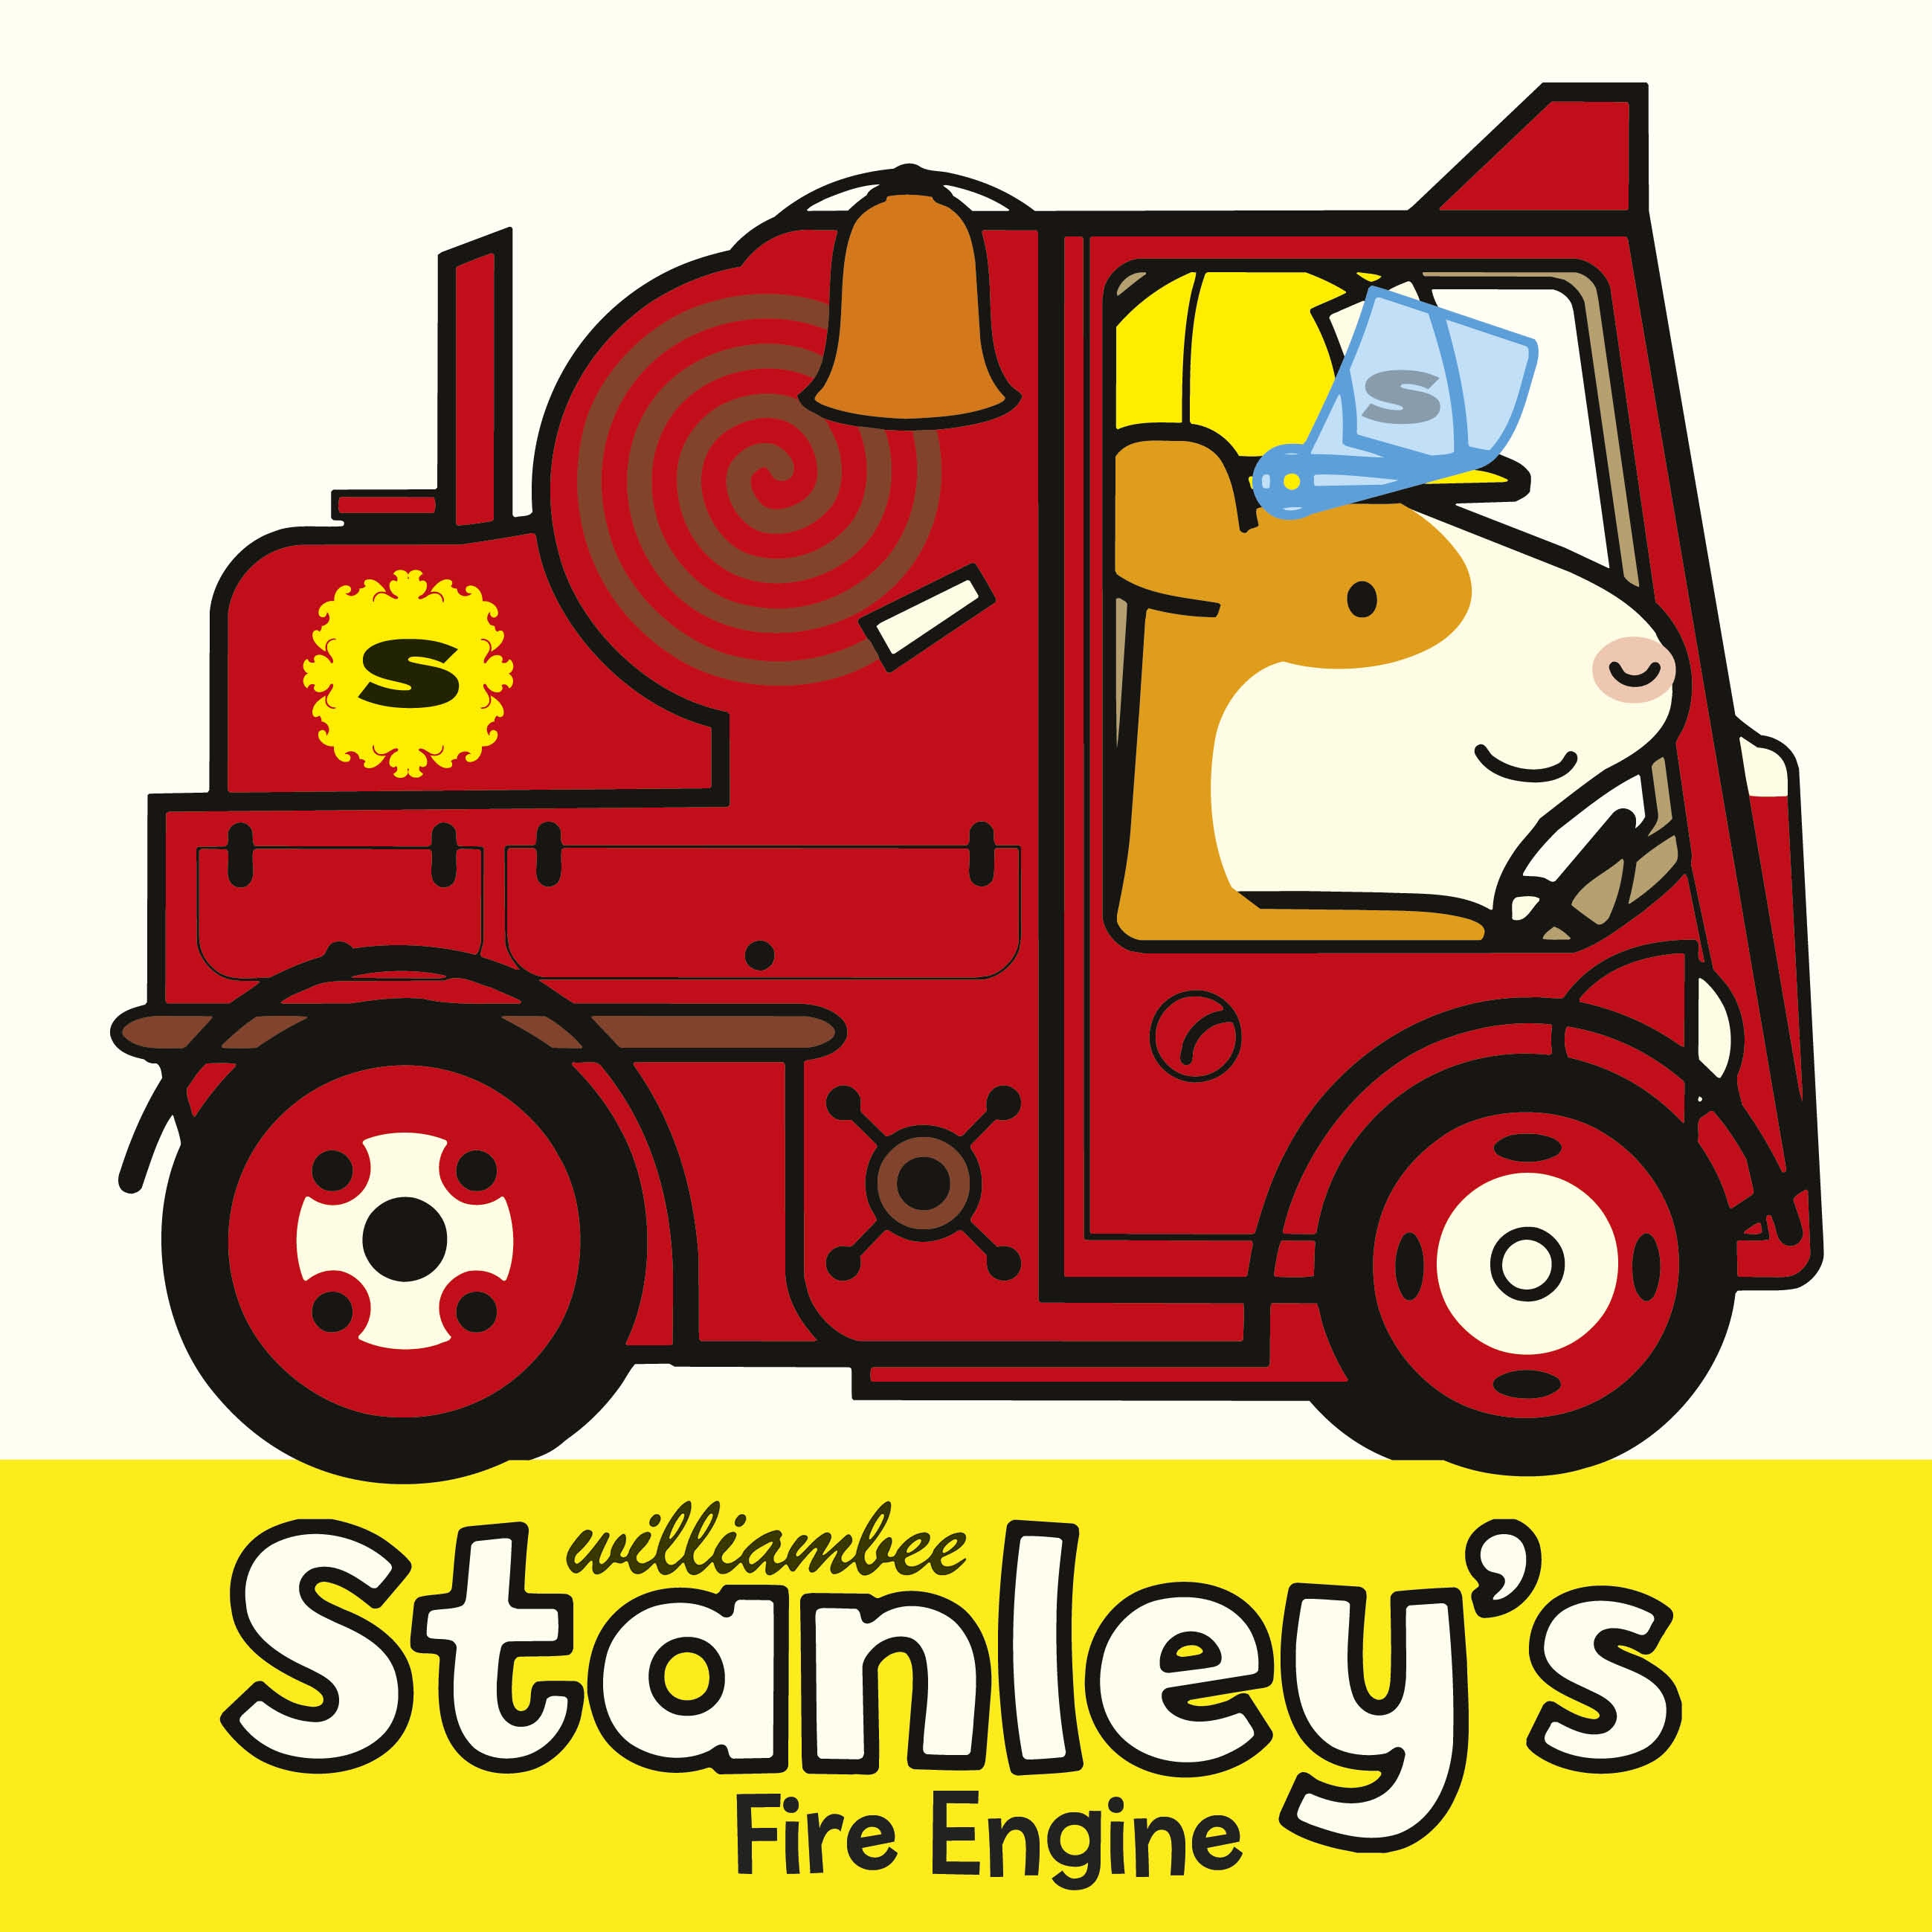 Book “Stanley's Fire Engine” by William Bee — September 3, 2020